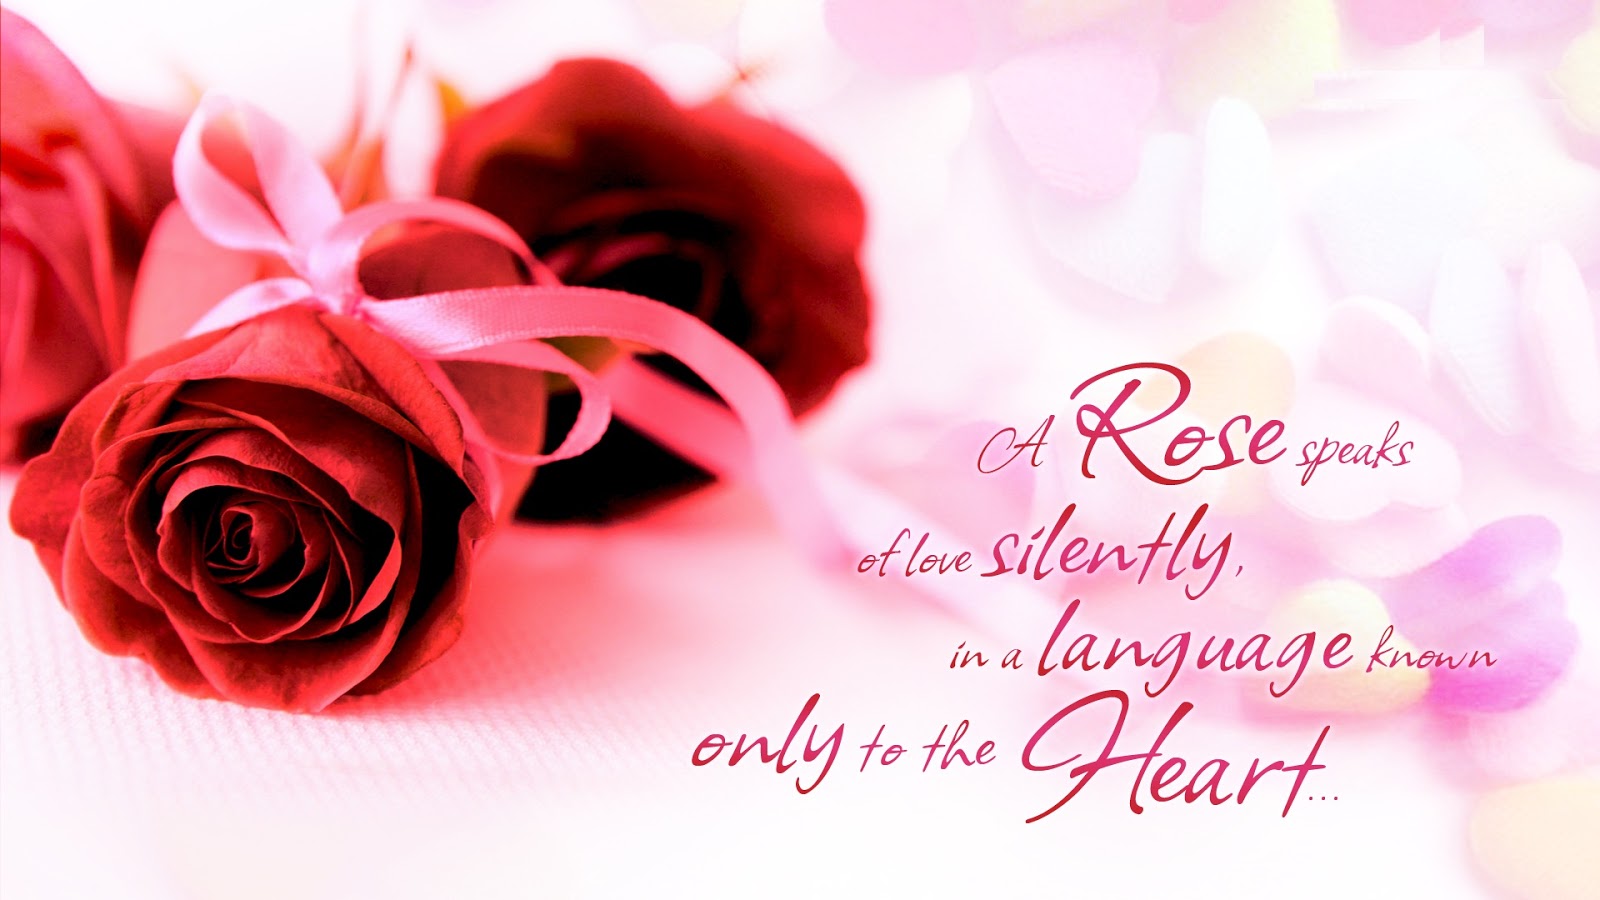 HAPPY ROSE DAY QUOTES